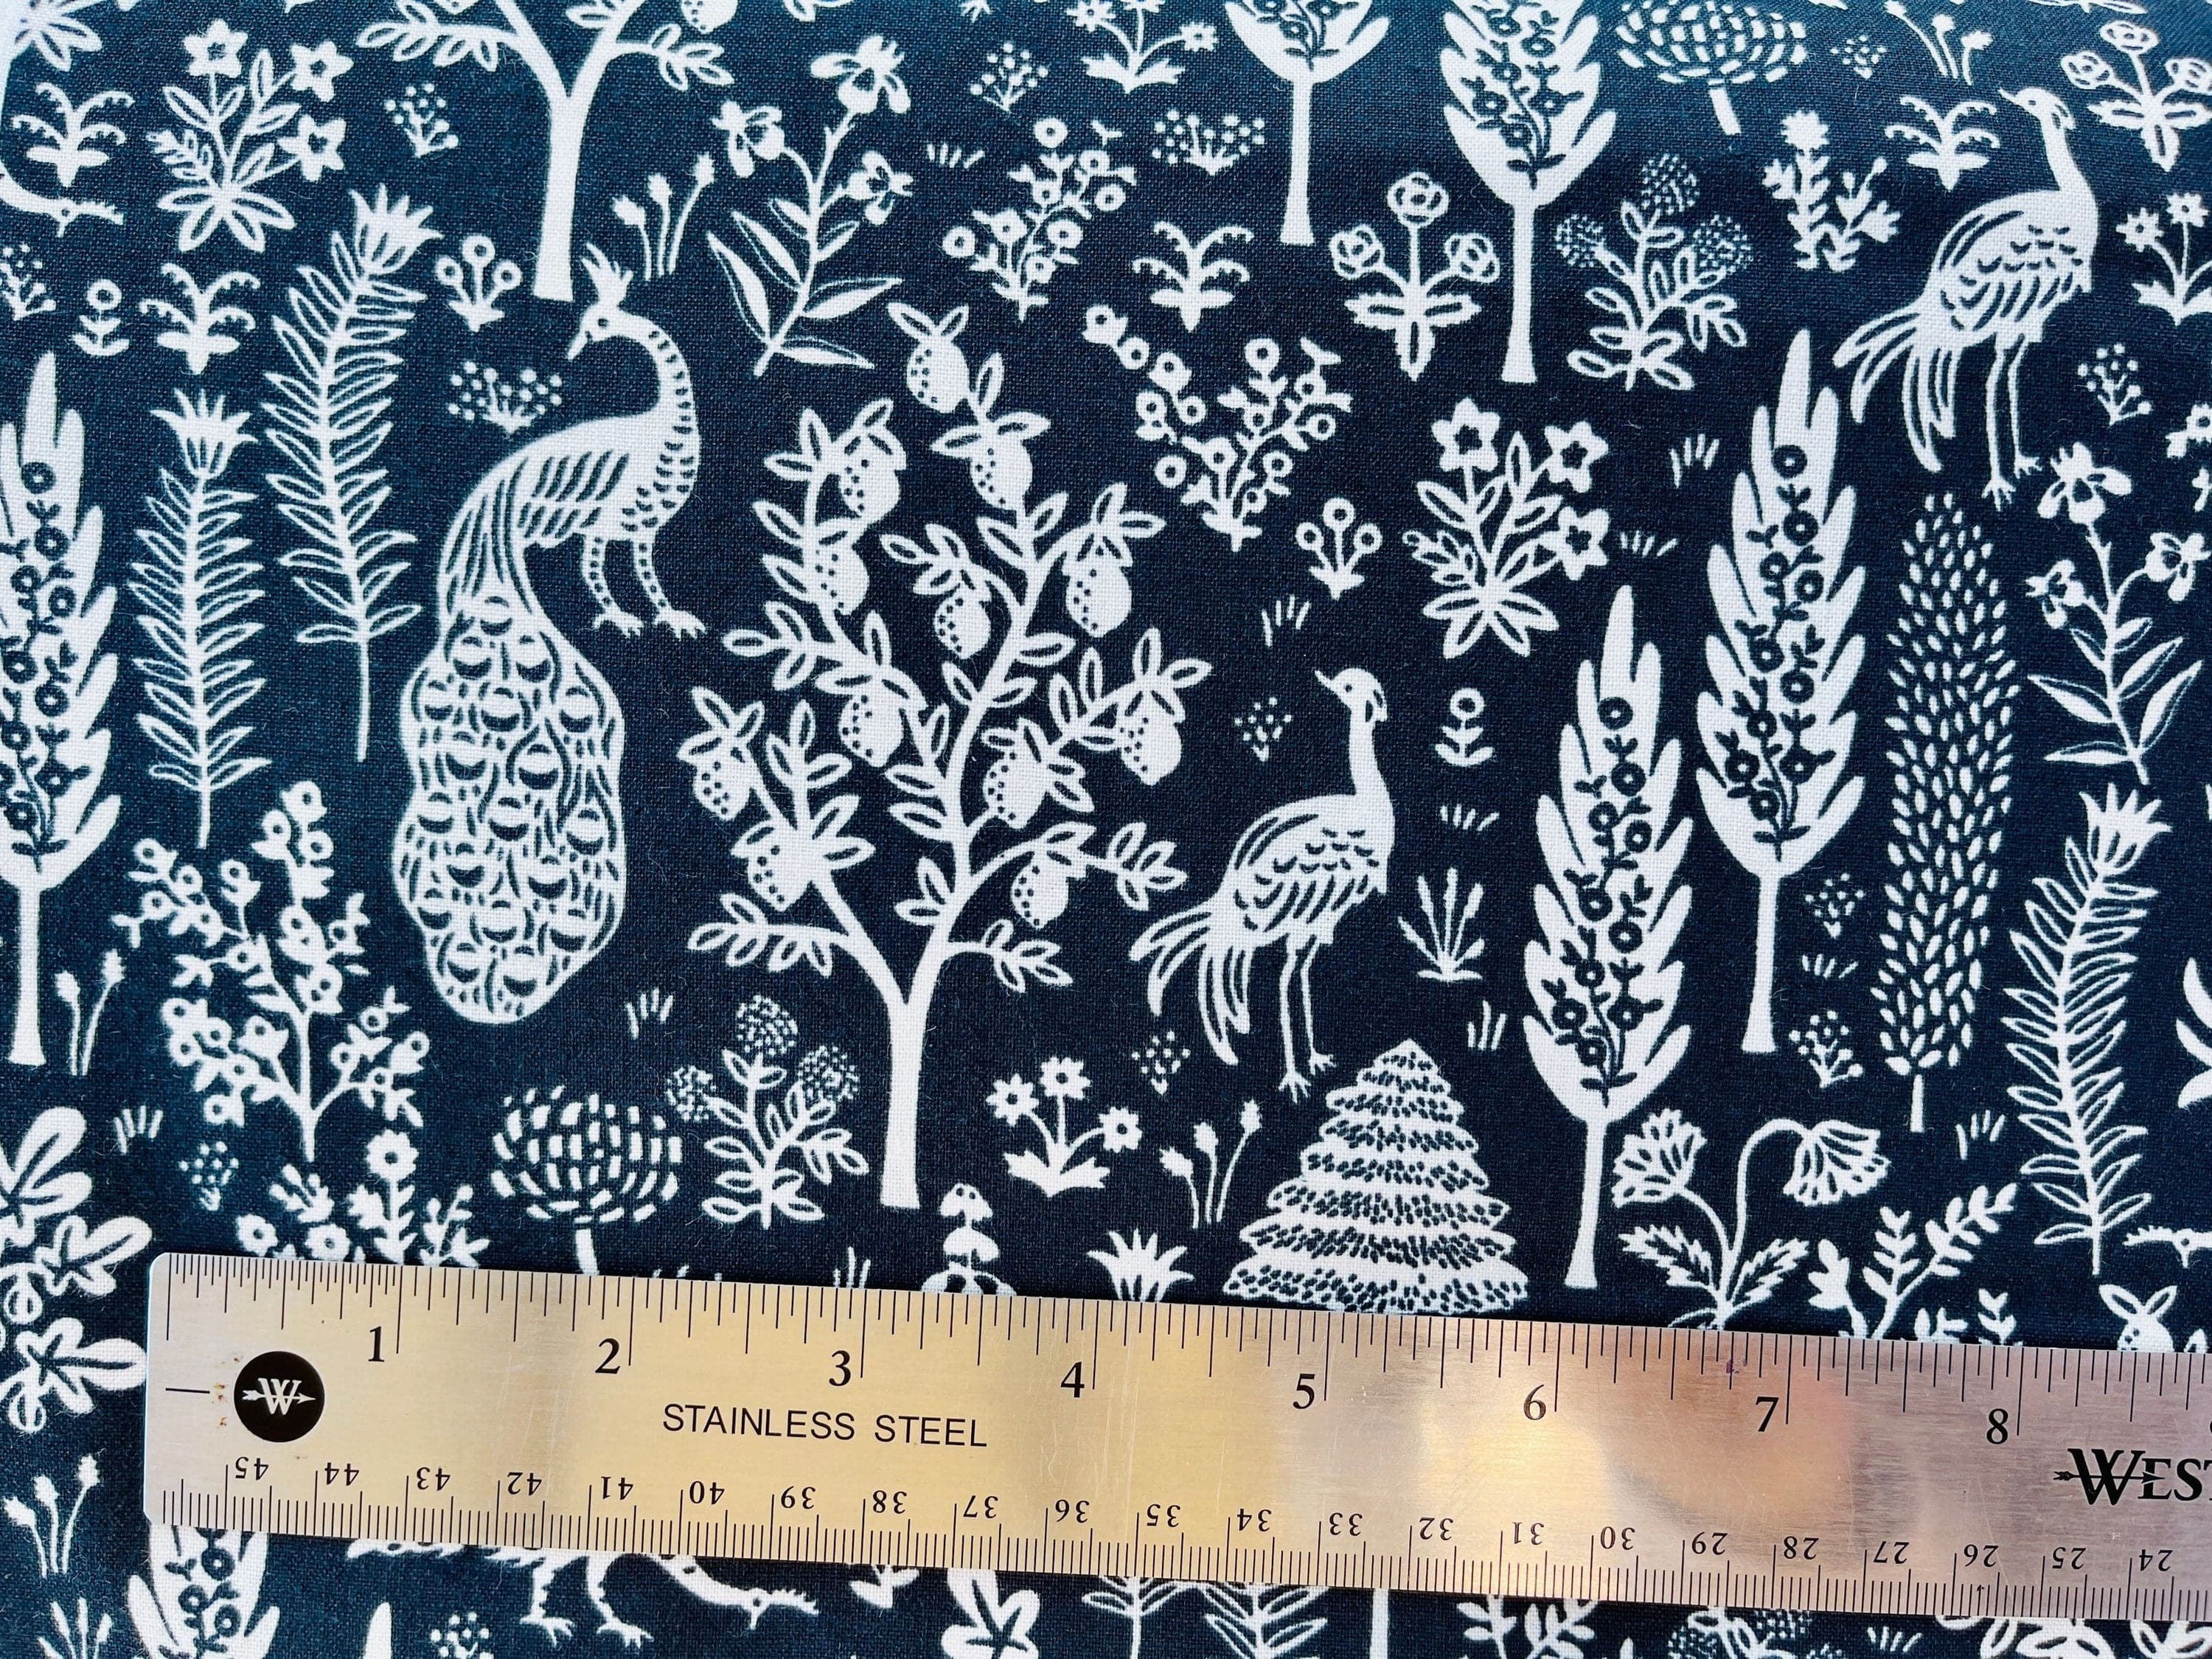 Camont - Menagerie - Black Metallic Fabric - Rifle Paper Co - Quilting Cotton Fabric - Cotton+ Steel - RP700-BK1